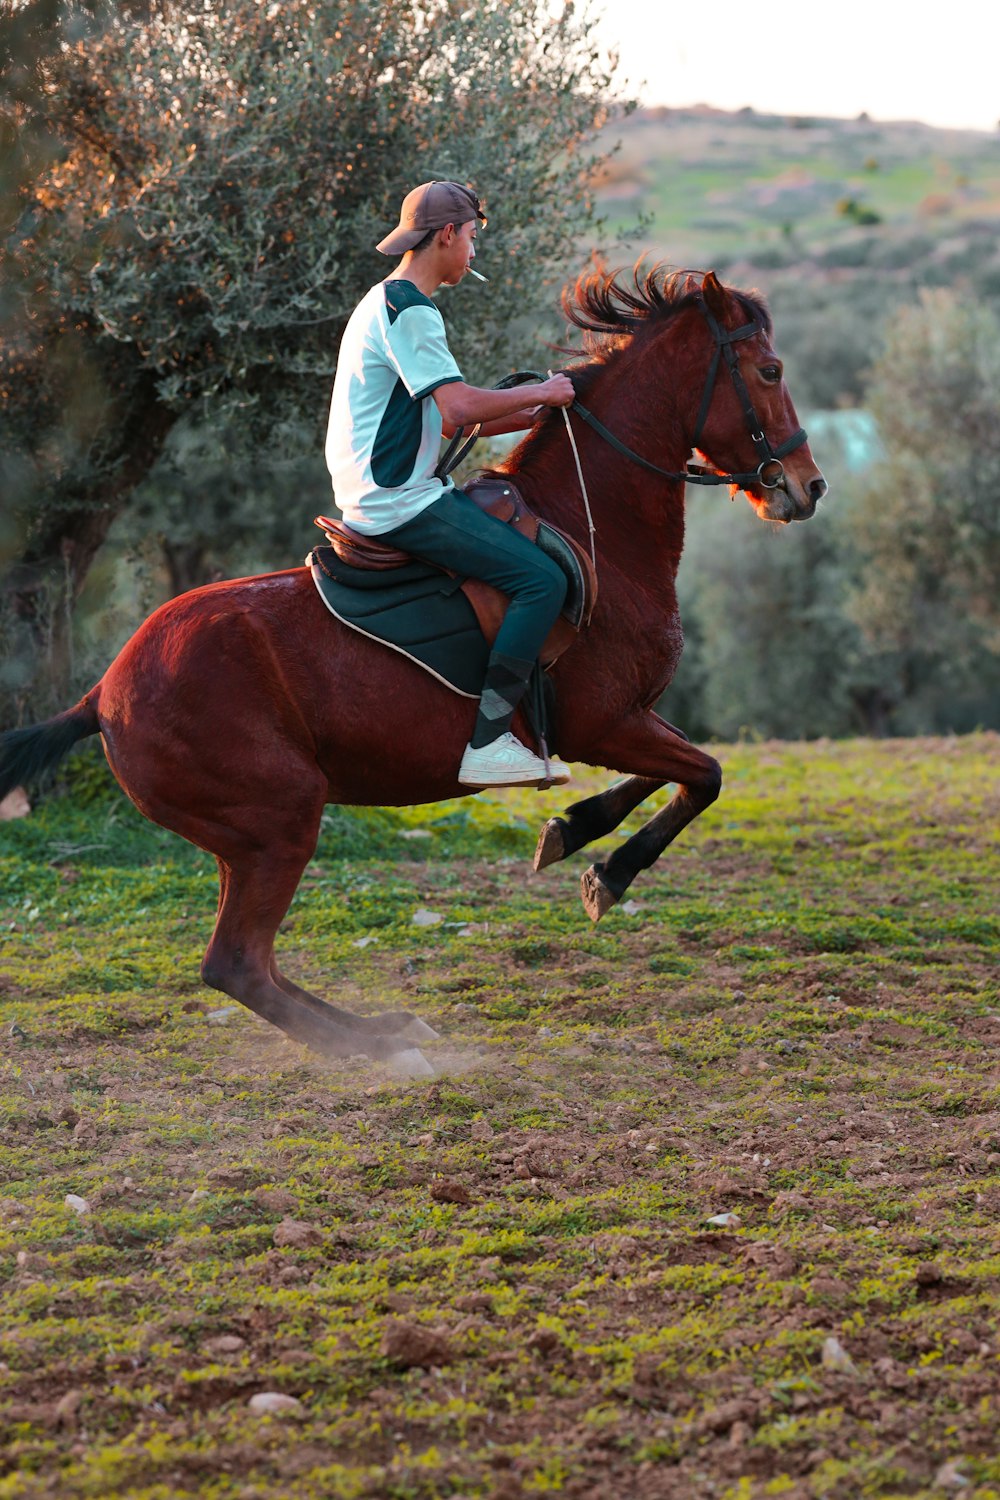 a woman riding on the back of a brown horse